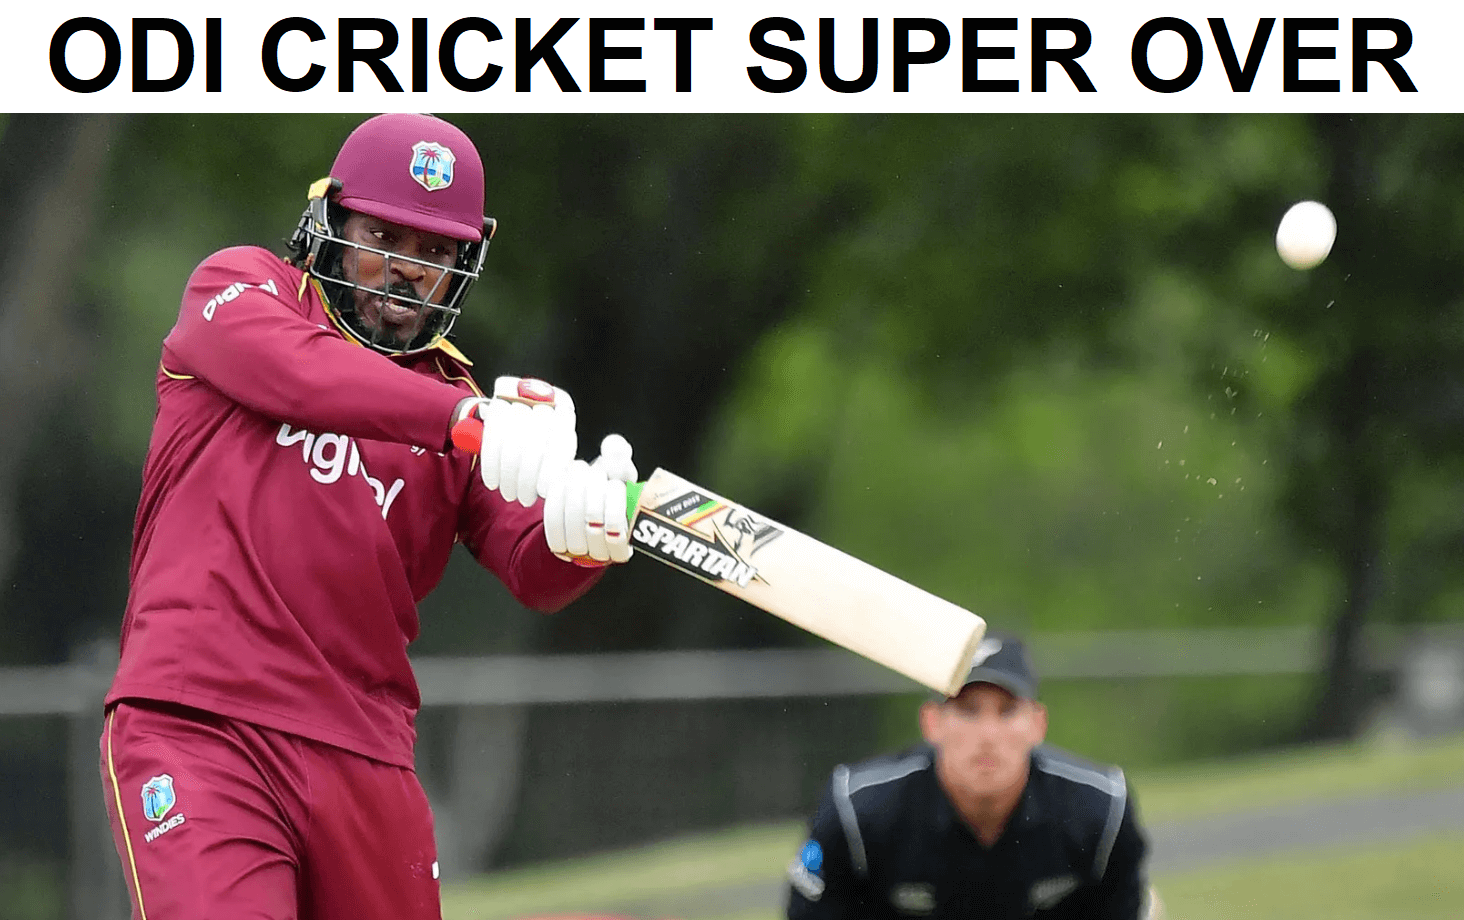 Is there a Super Over in ODI cricket?